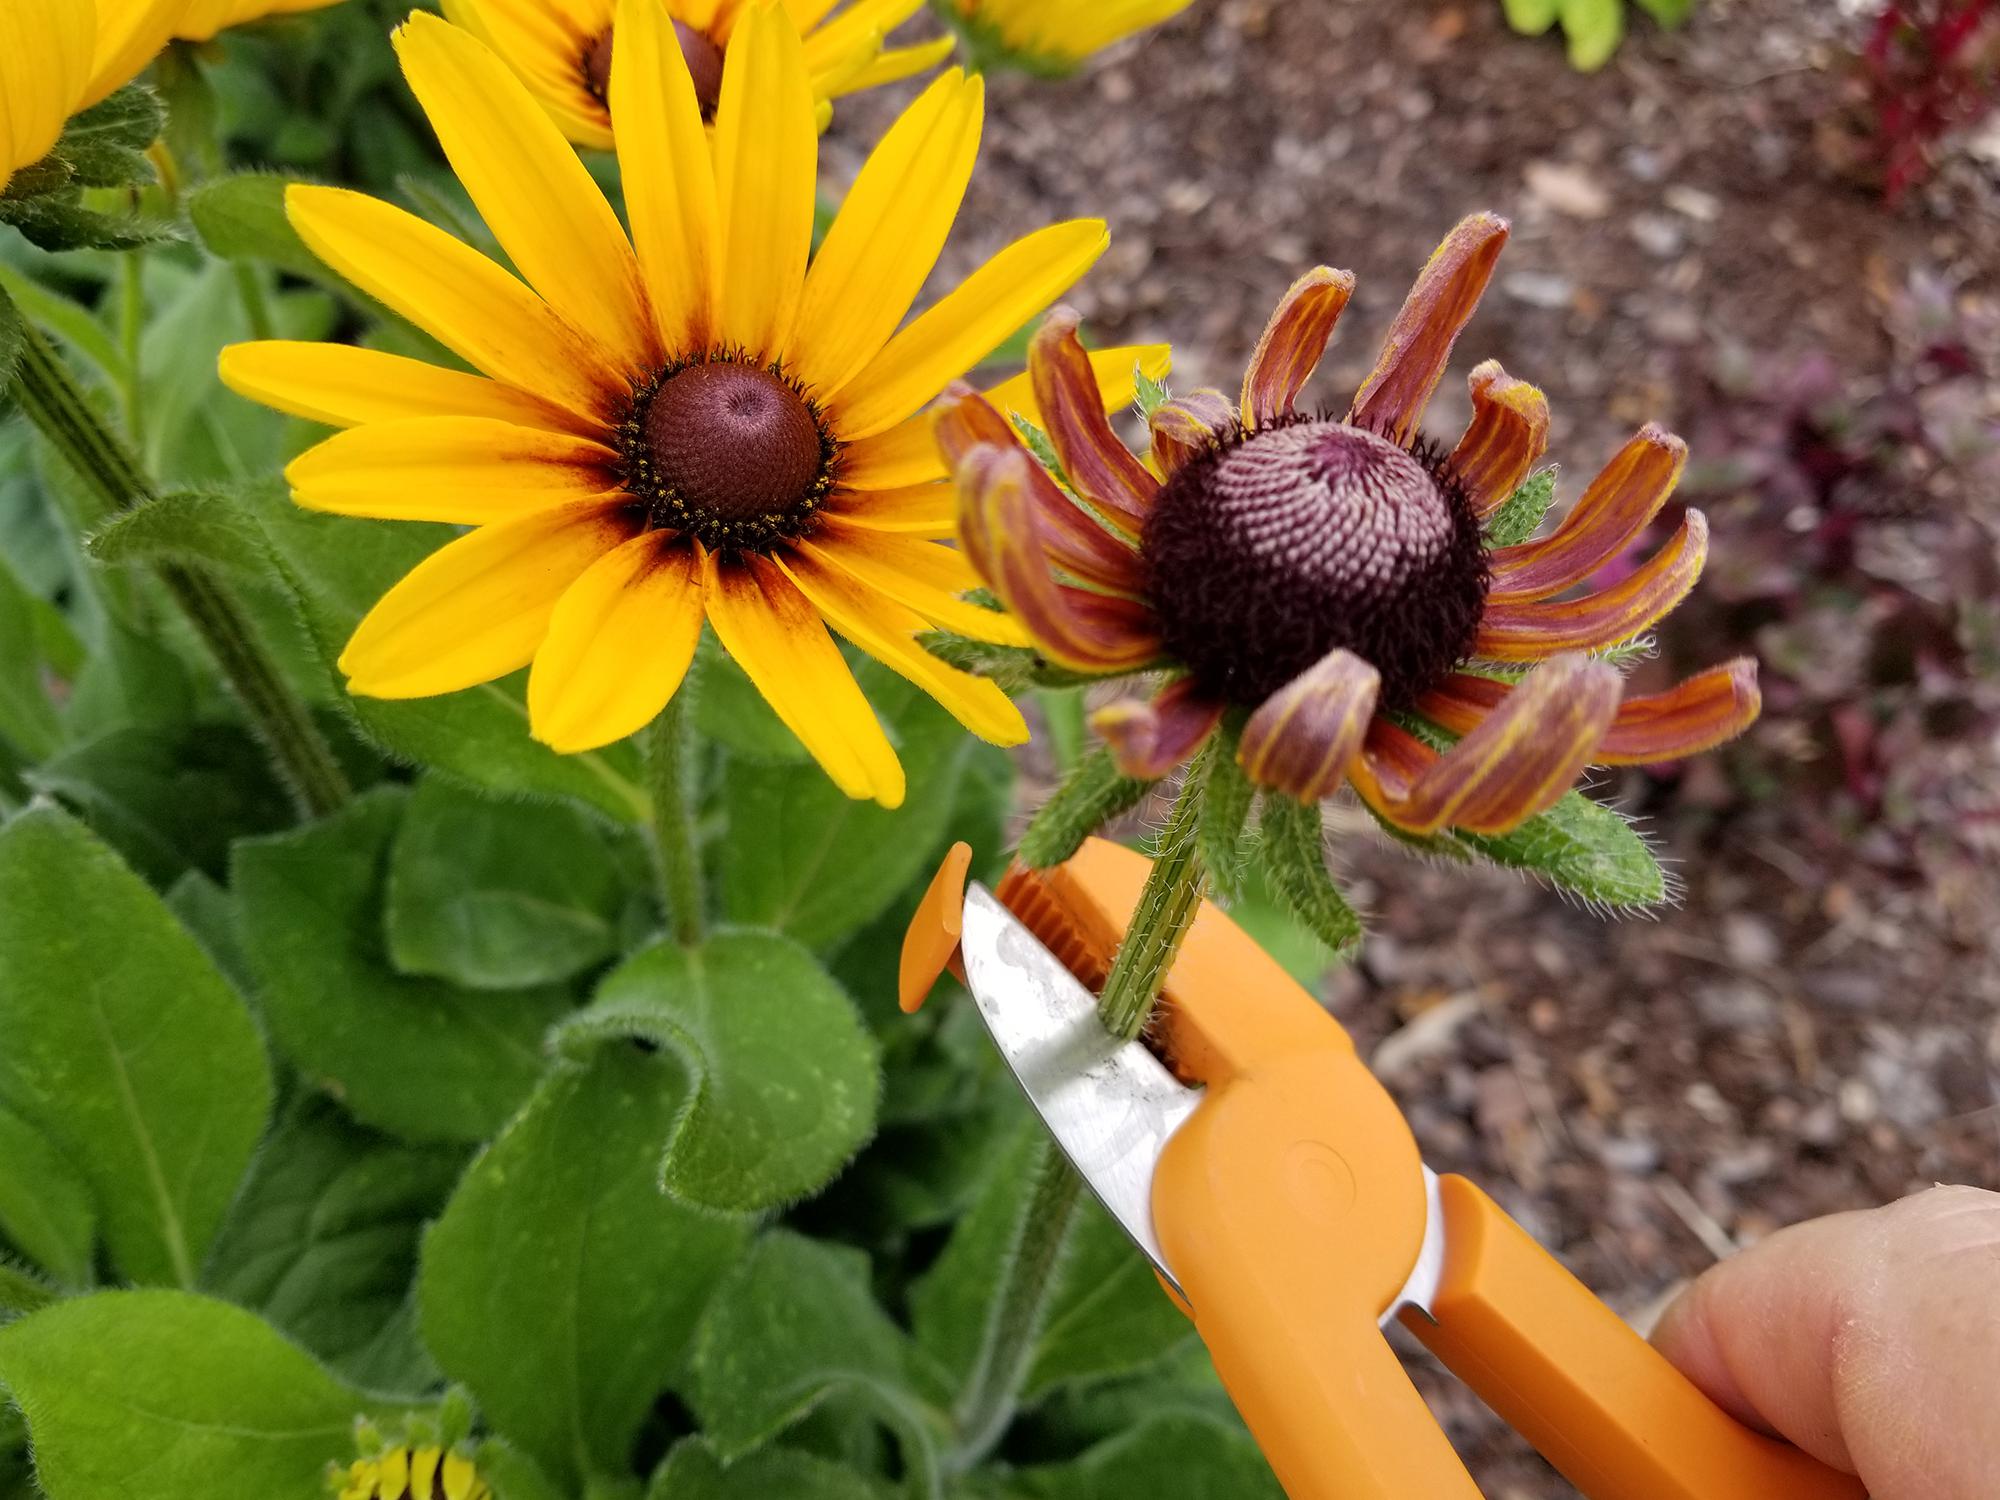 A pair of orange trimmers is about to snip off a spent flower.